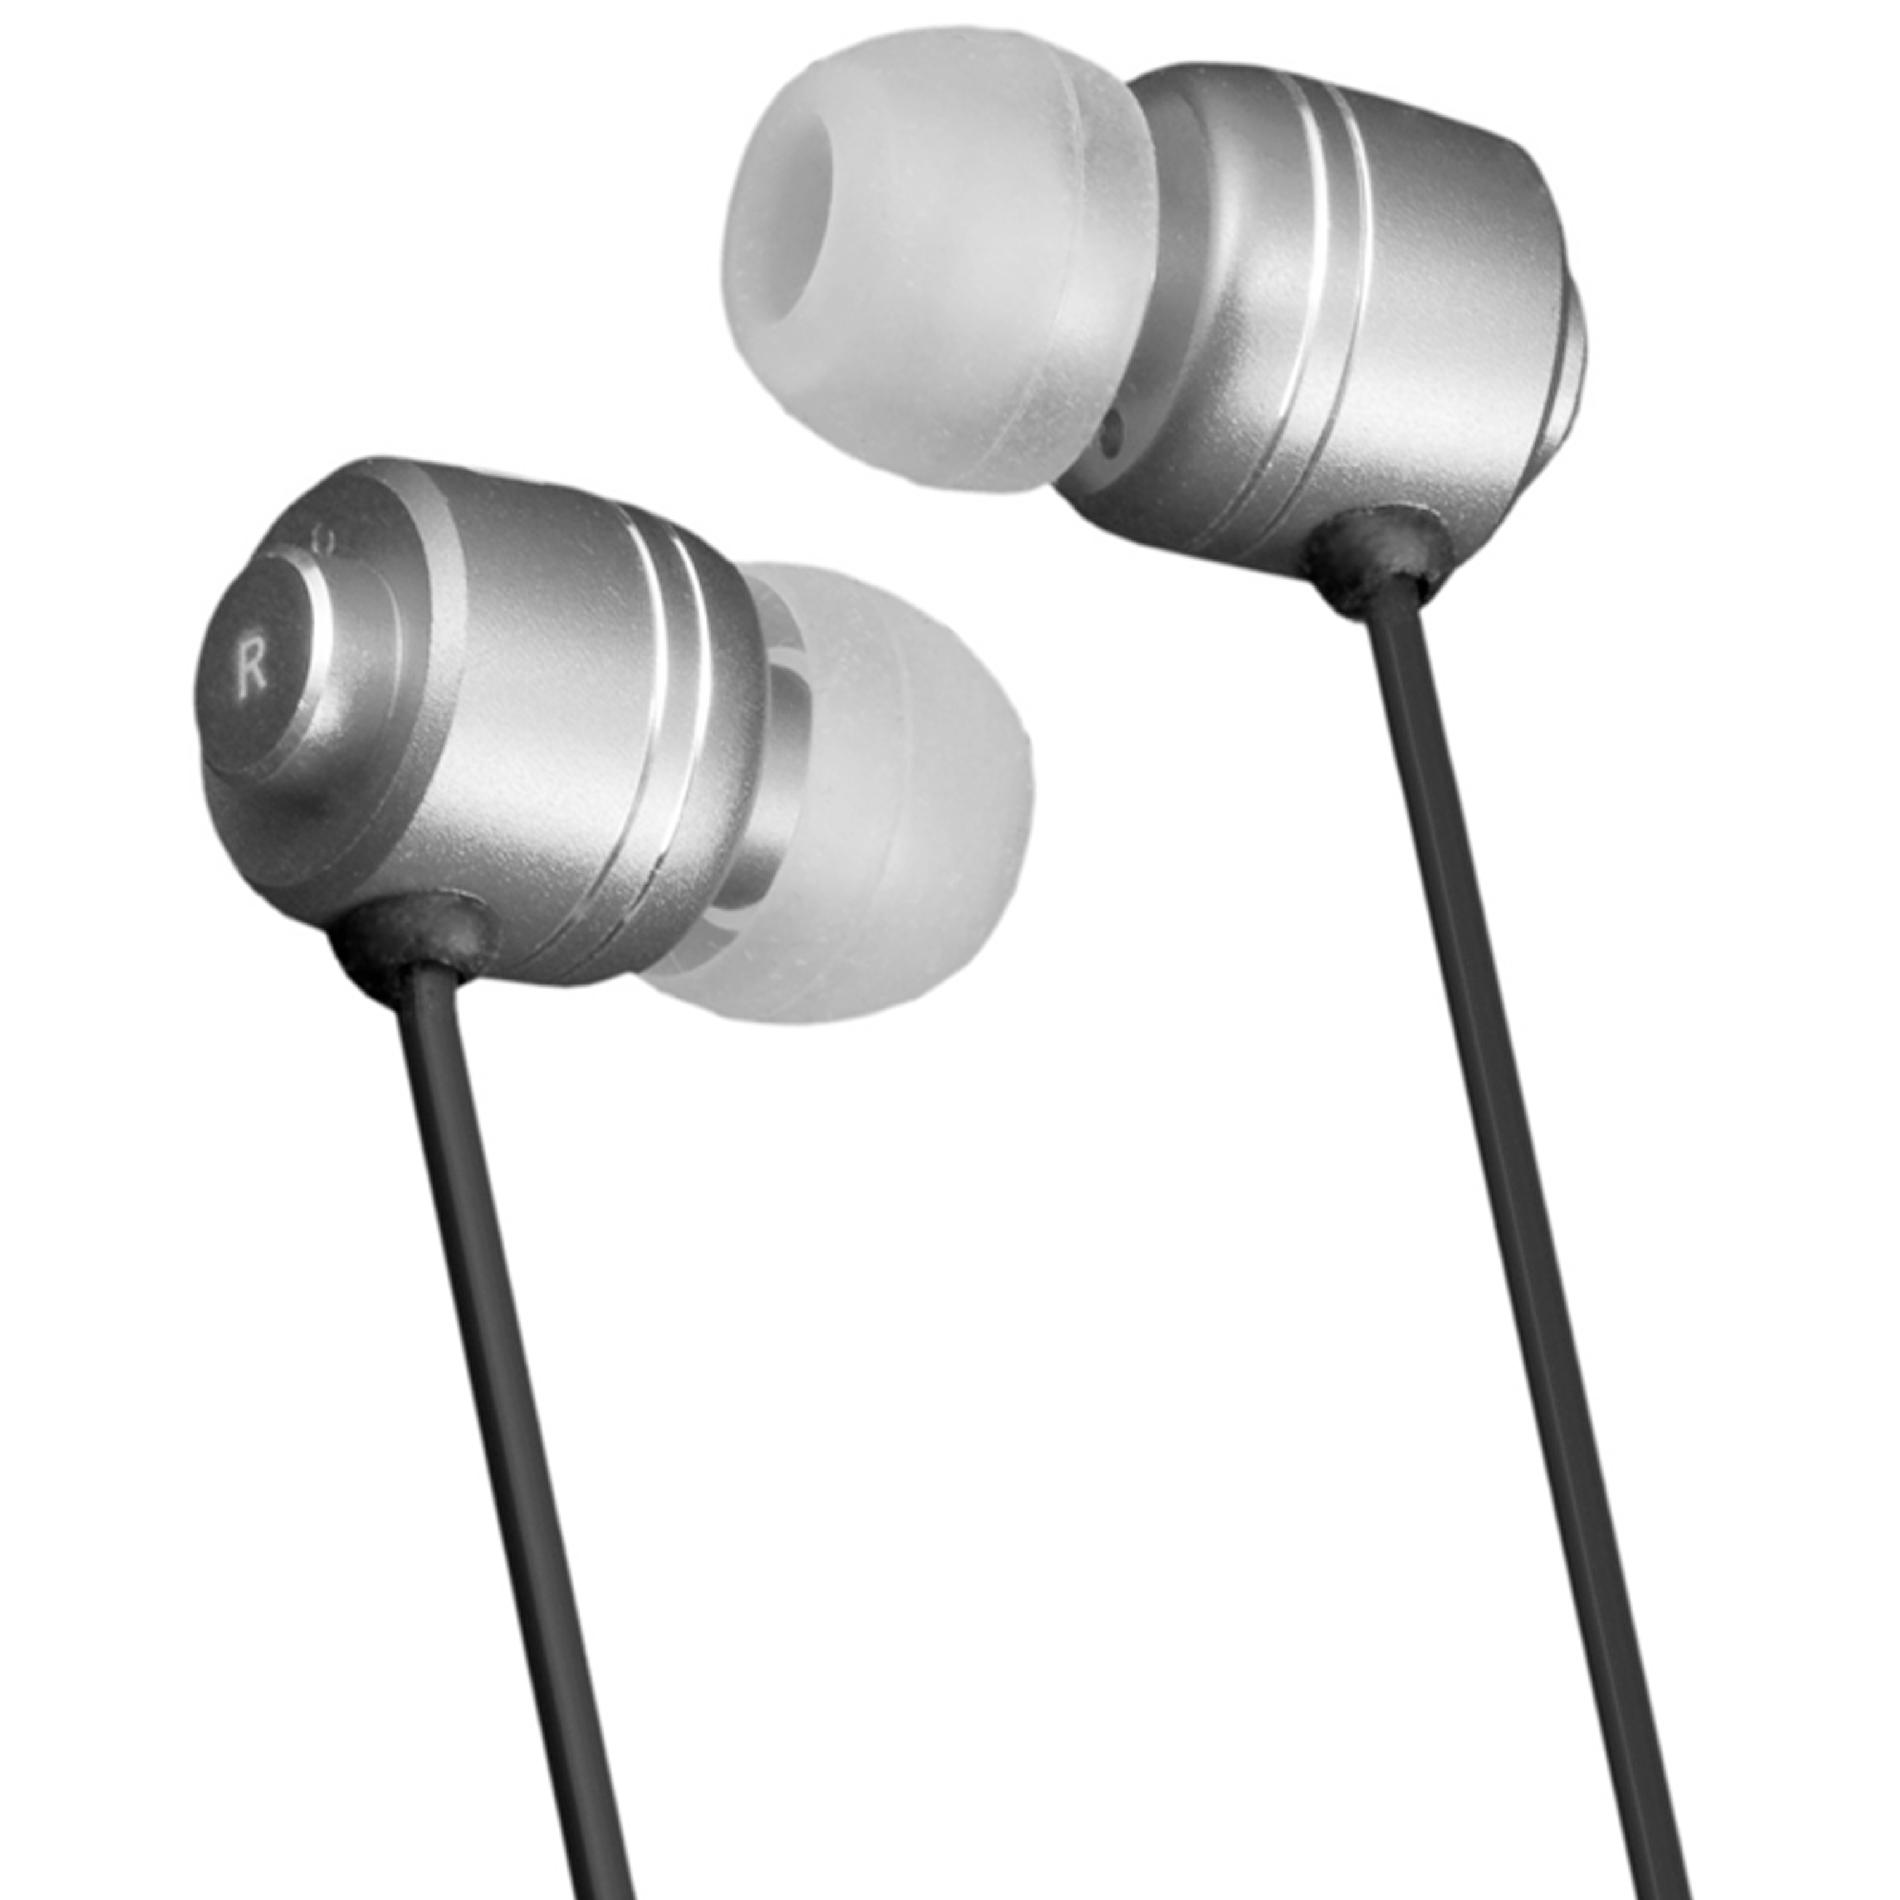 EAN 9328854001570 product image for PRO Noise Isolation Alloy Earphones - Silver | upcitemdb.com